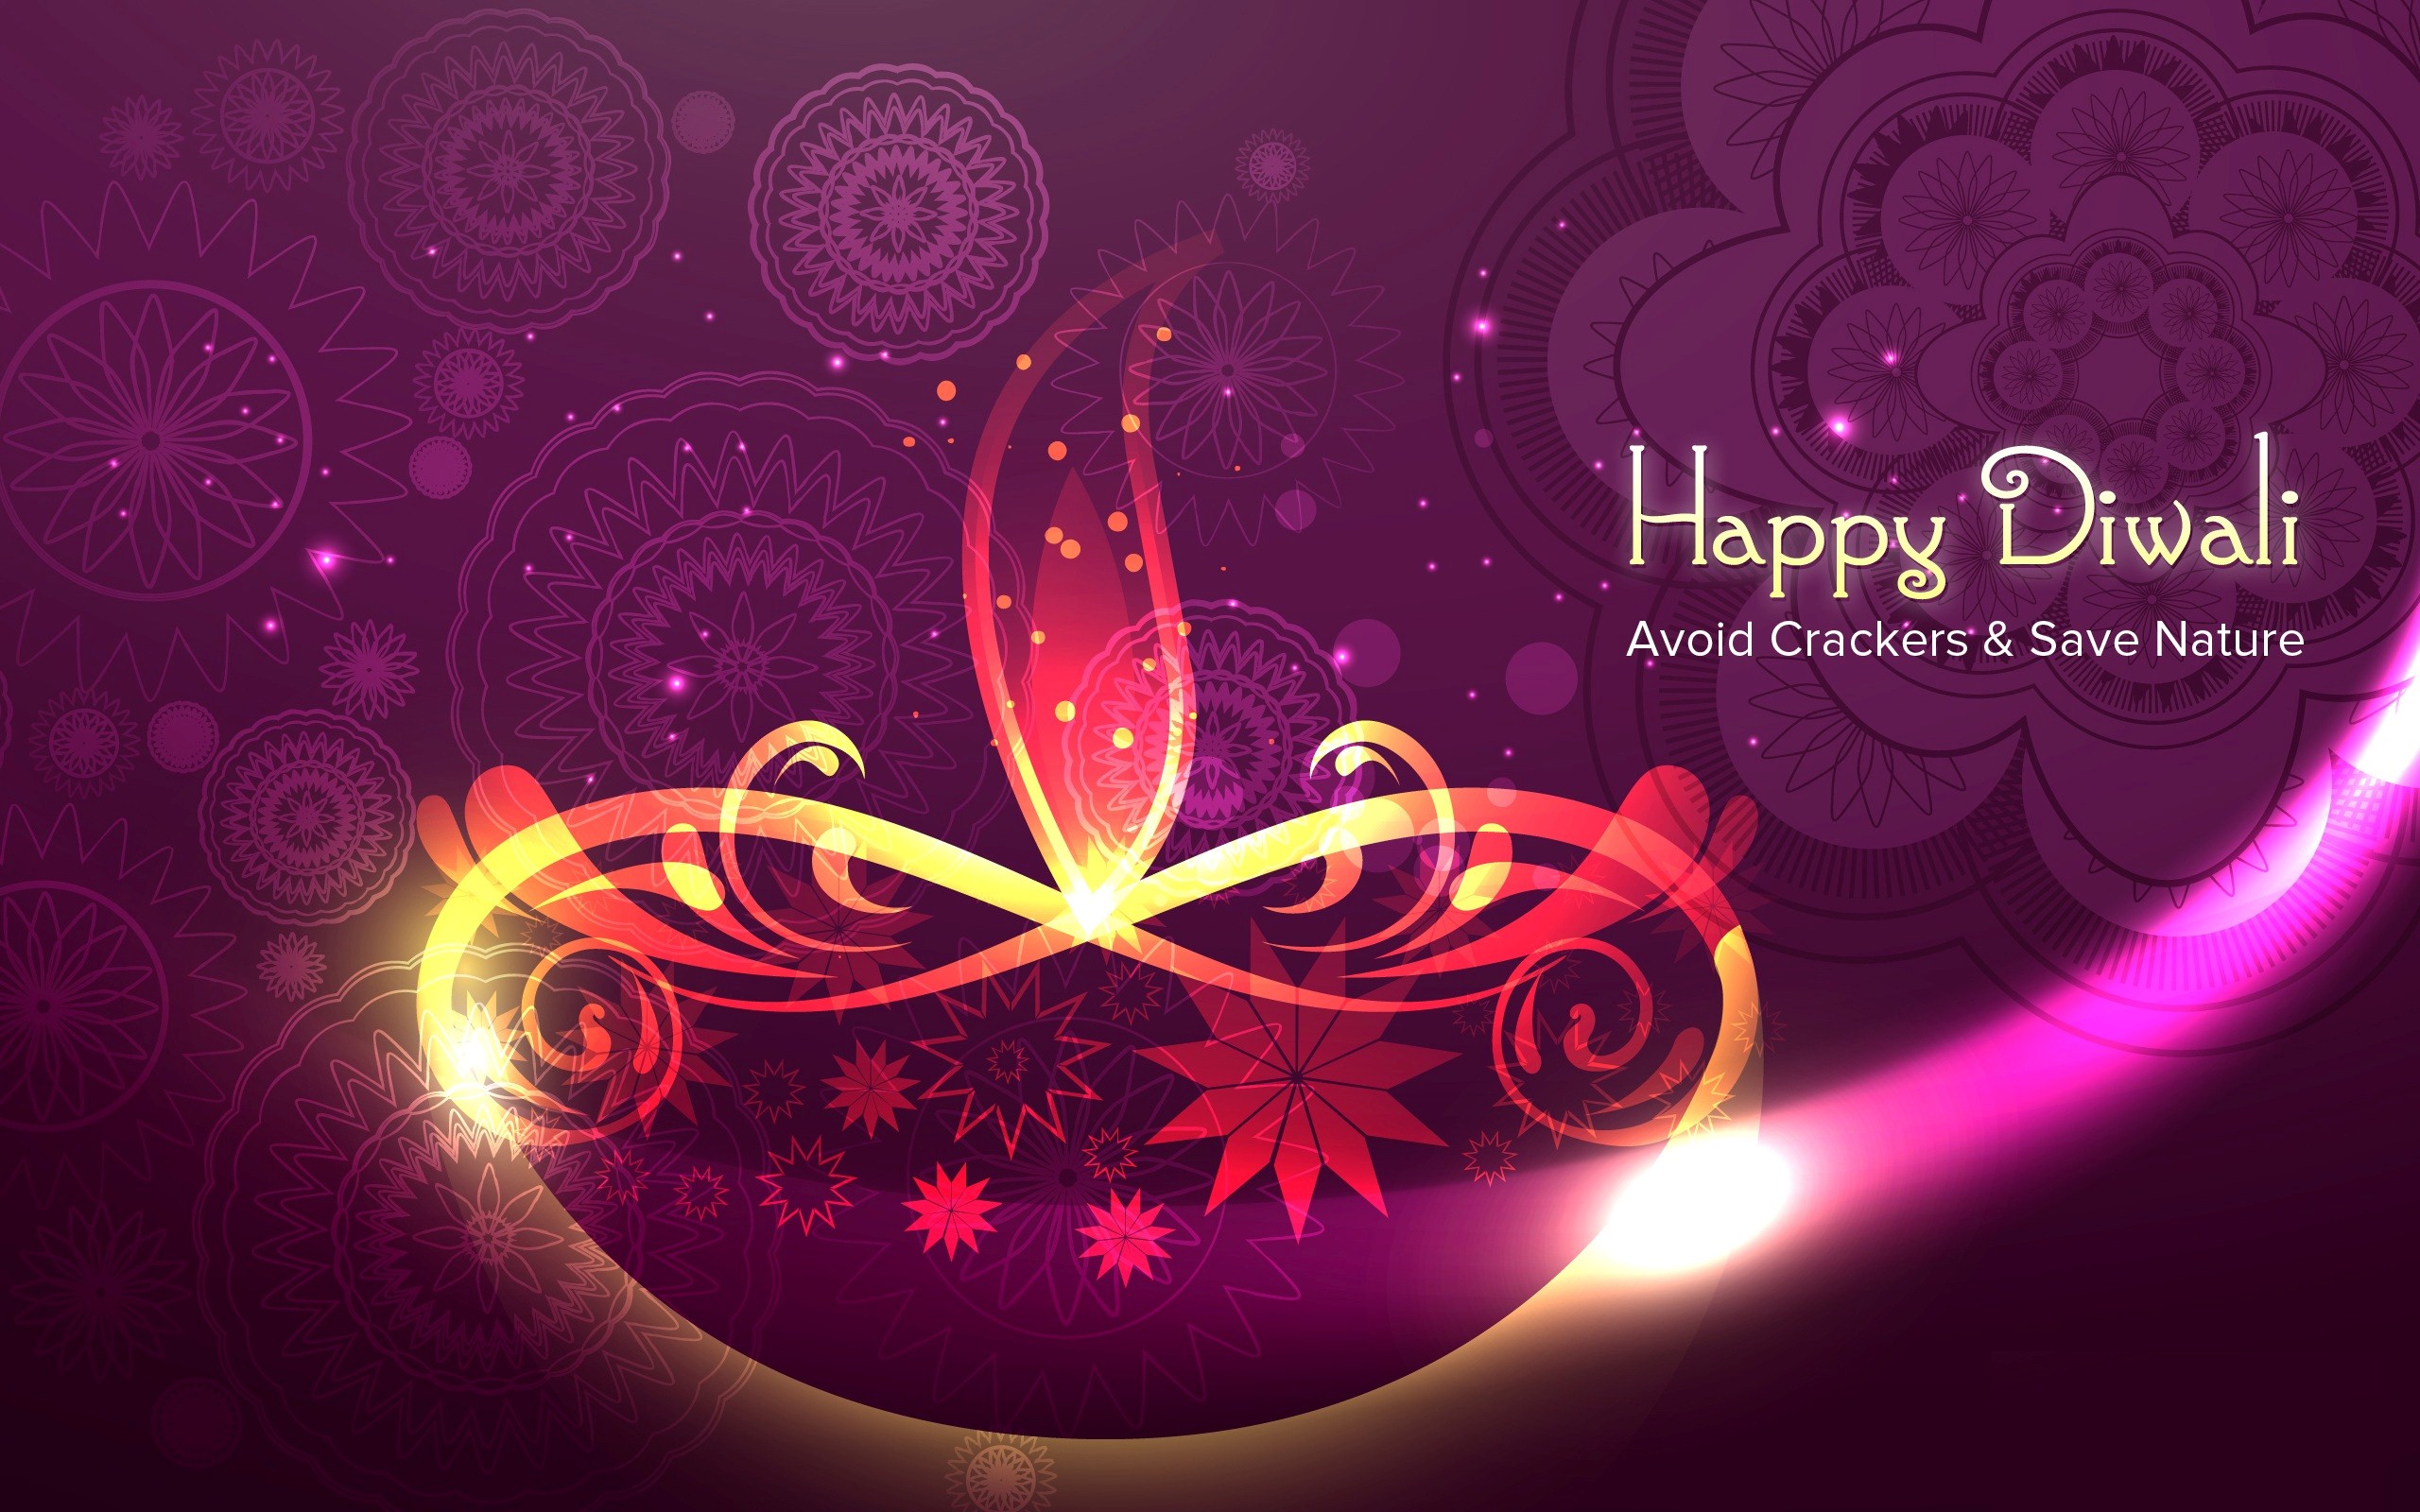 Safe And Save Nature Wish You Happy Diwali HD Image Wallpaper